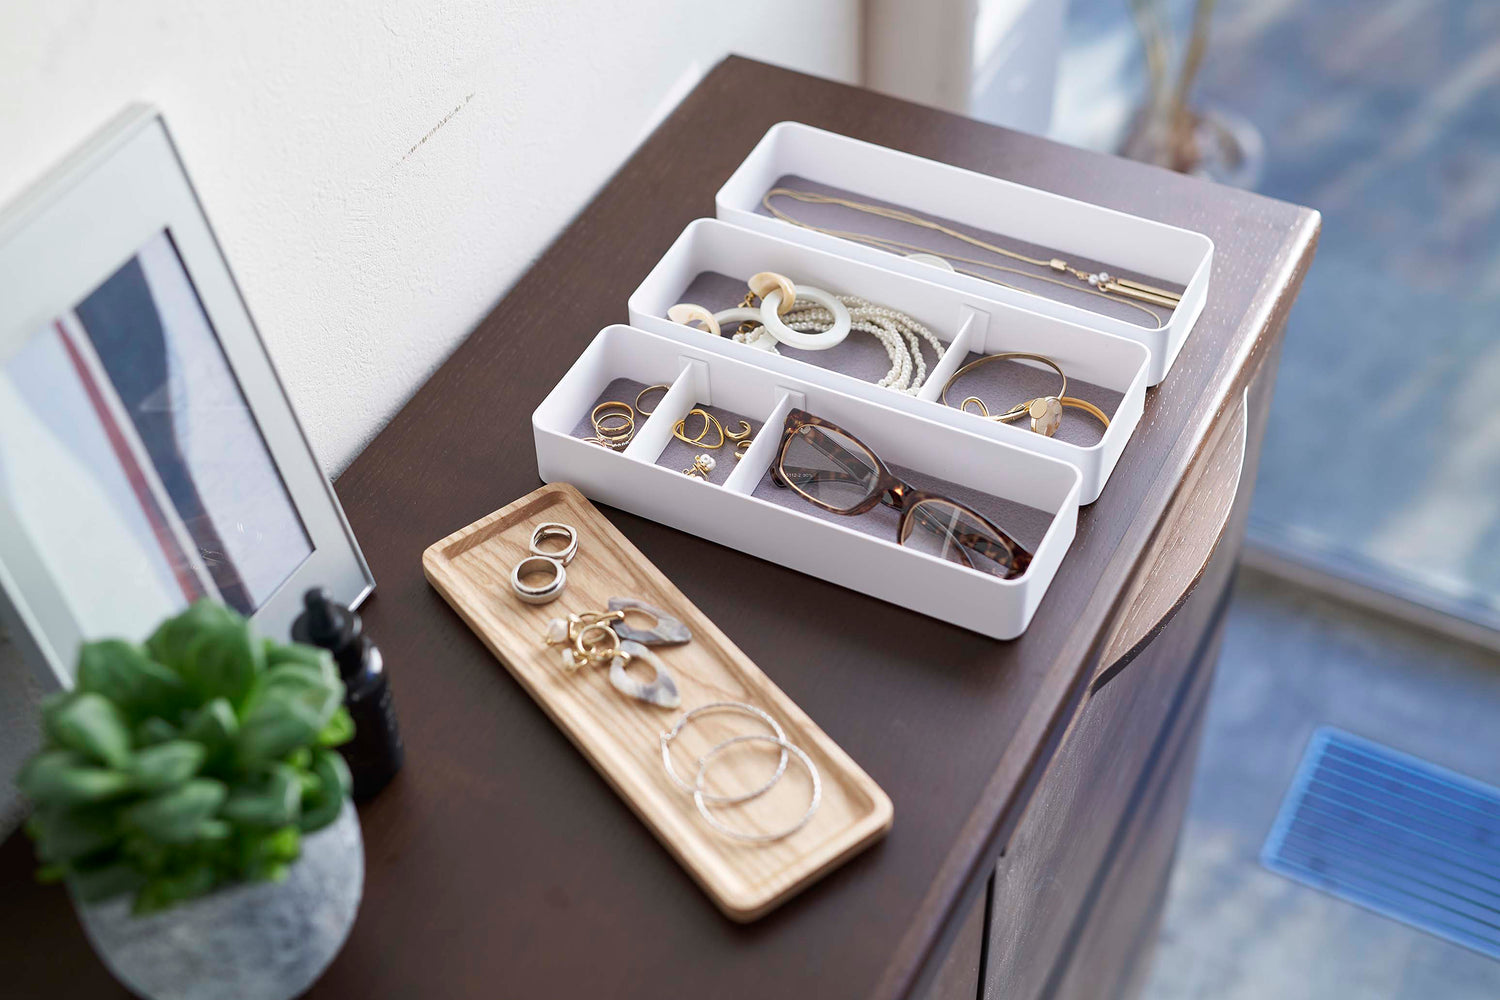 View 7 - White Stacking Watch and Accessory Case opened with glasses and jewelry